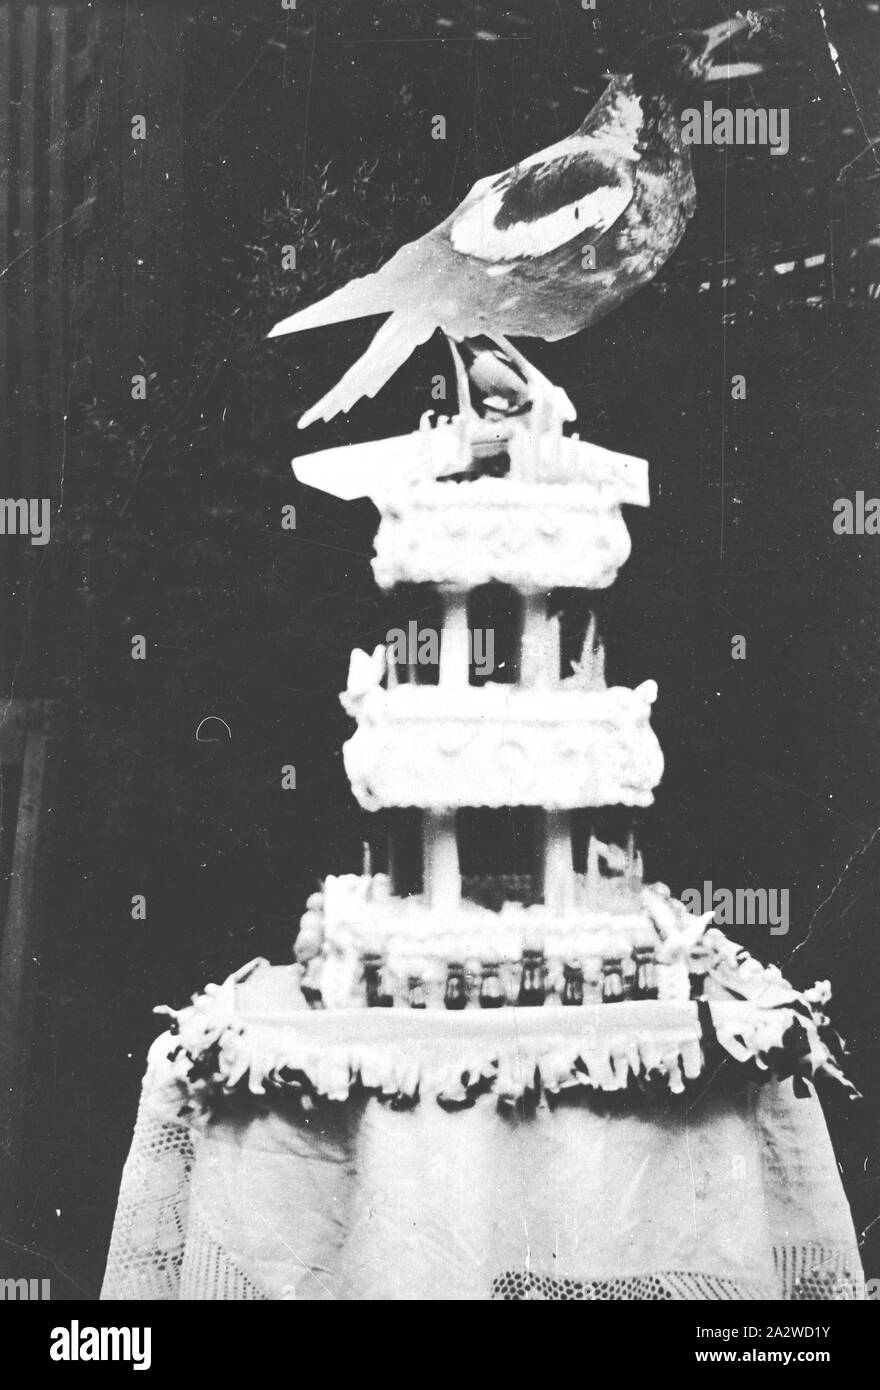 Negative - Collingwood, Victoria, 1930, A cake made to commemorate four consecutive premierships by the Collingwood Football Club. The magpie was wooden and measured 40cm by 34 cm. The Kewpie dolls around the base represented the members of the team. The cake was the centrepiece on the banquet Stock Photo